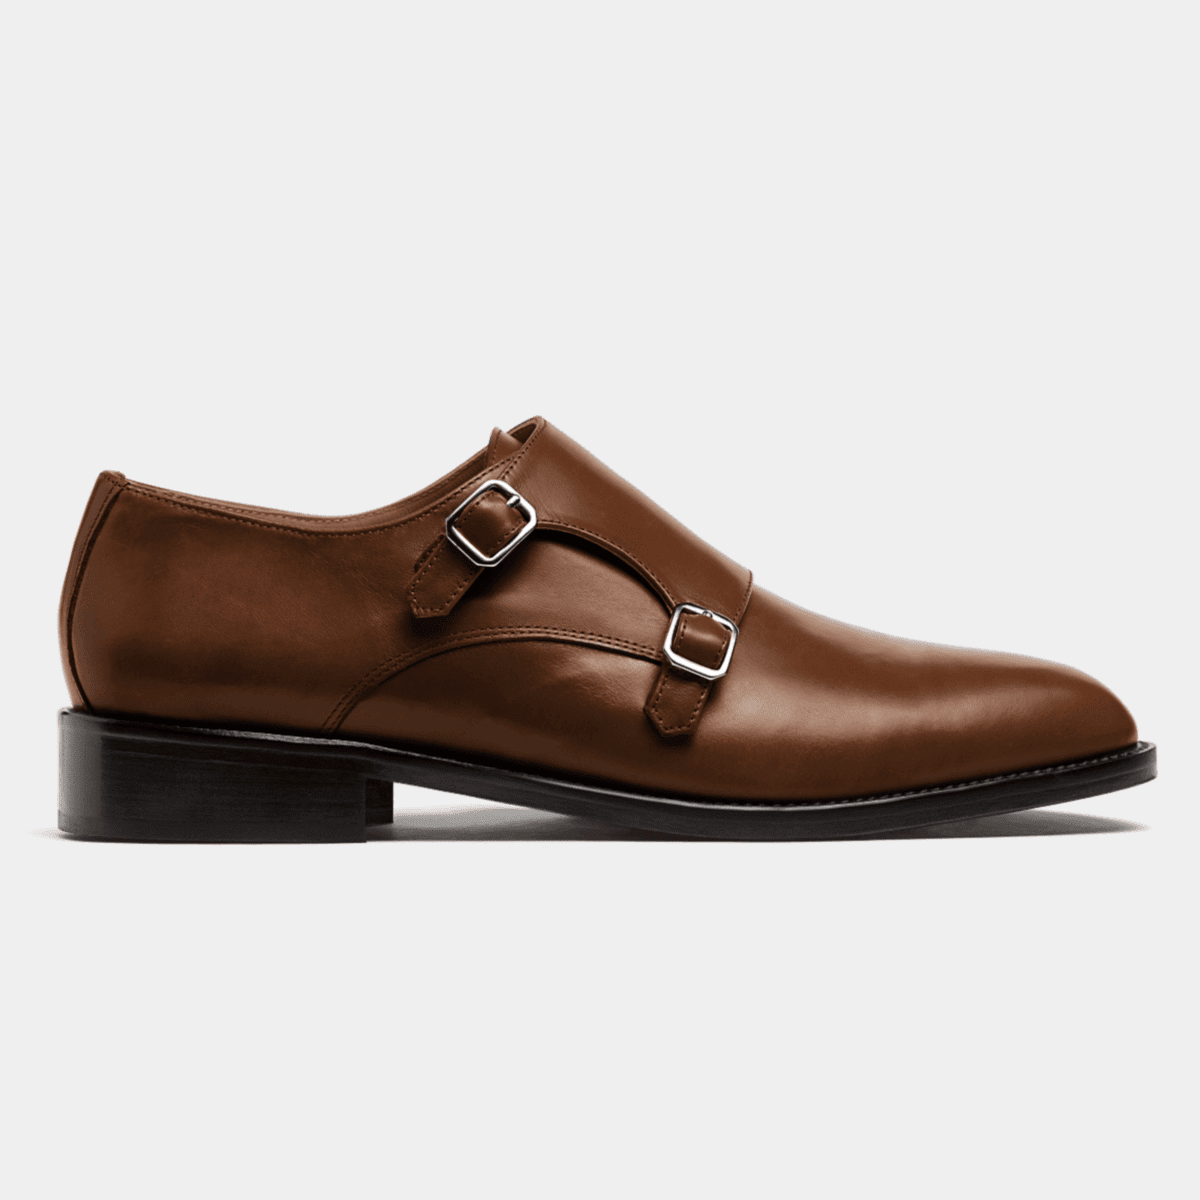 Double Monk Strap Shoes | Made in Spain - Hockerty